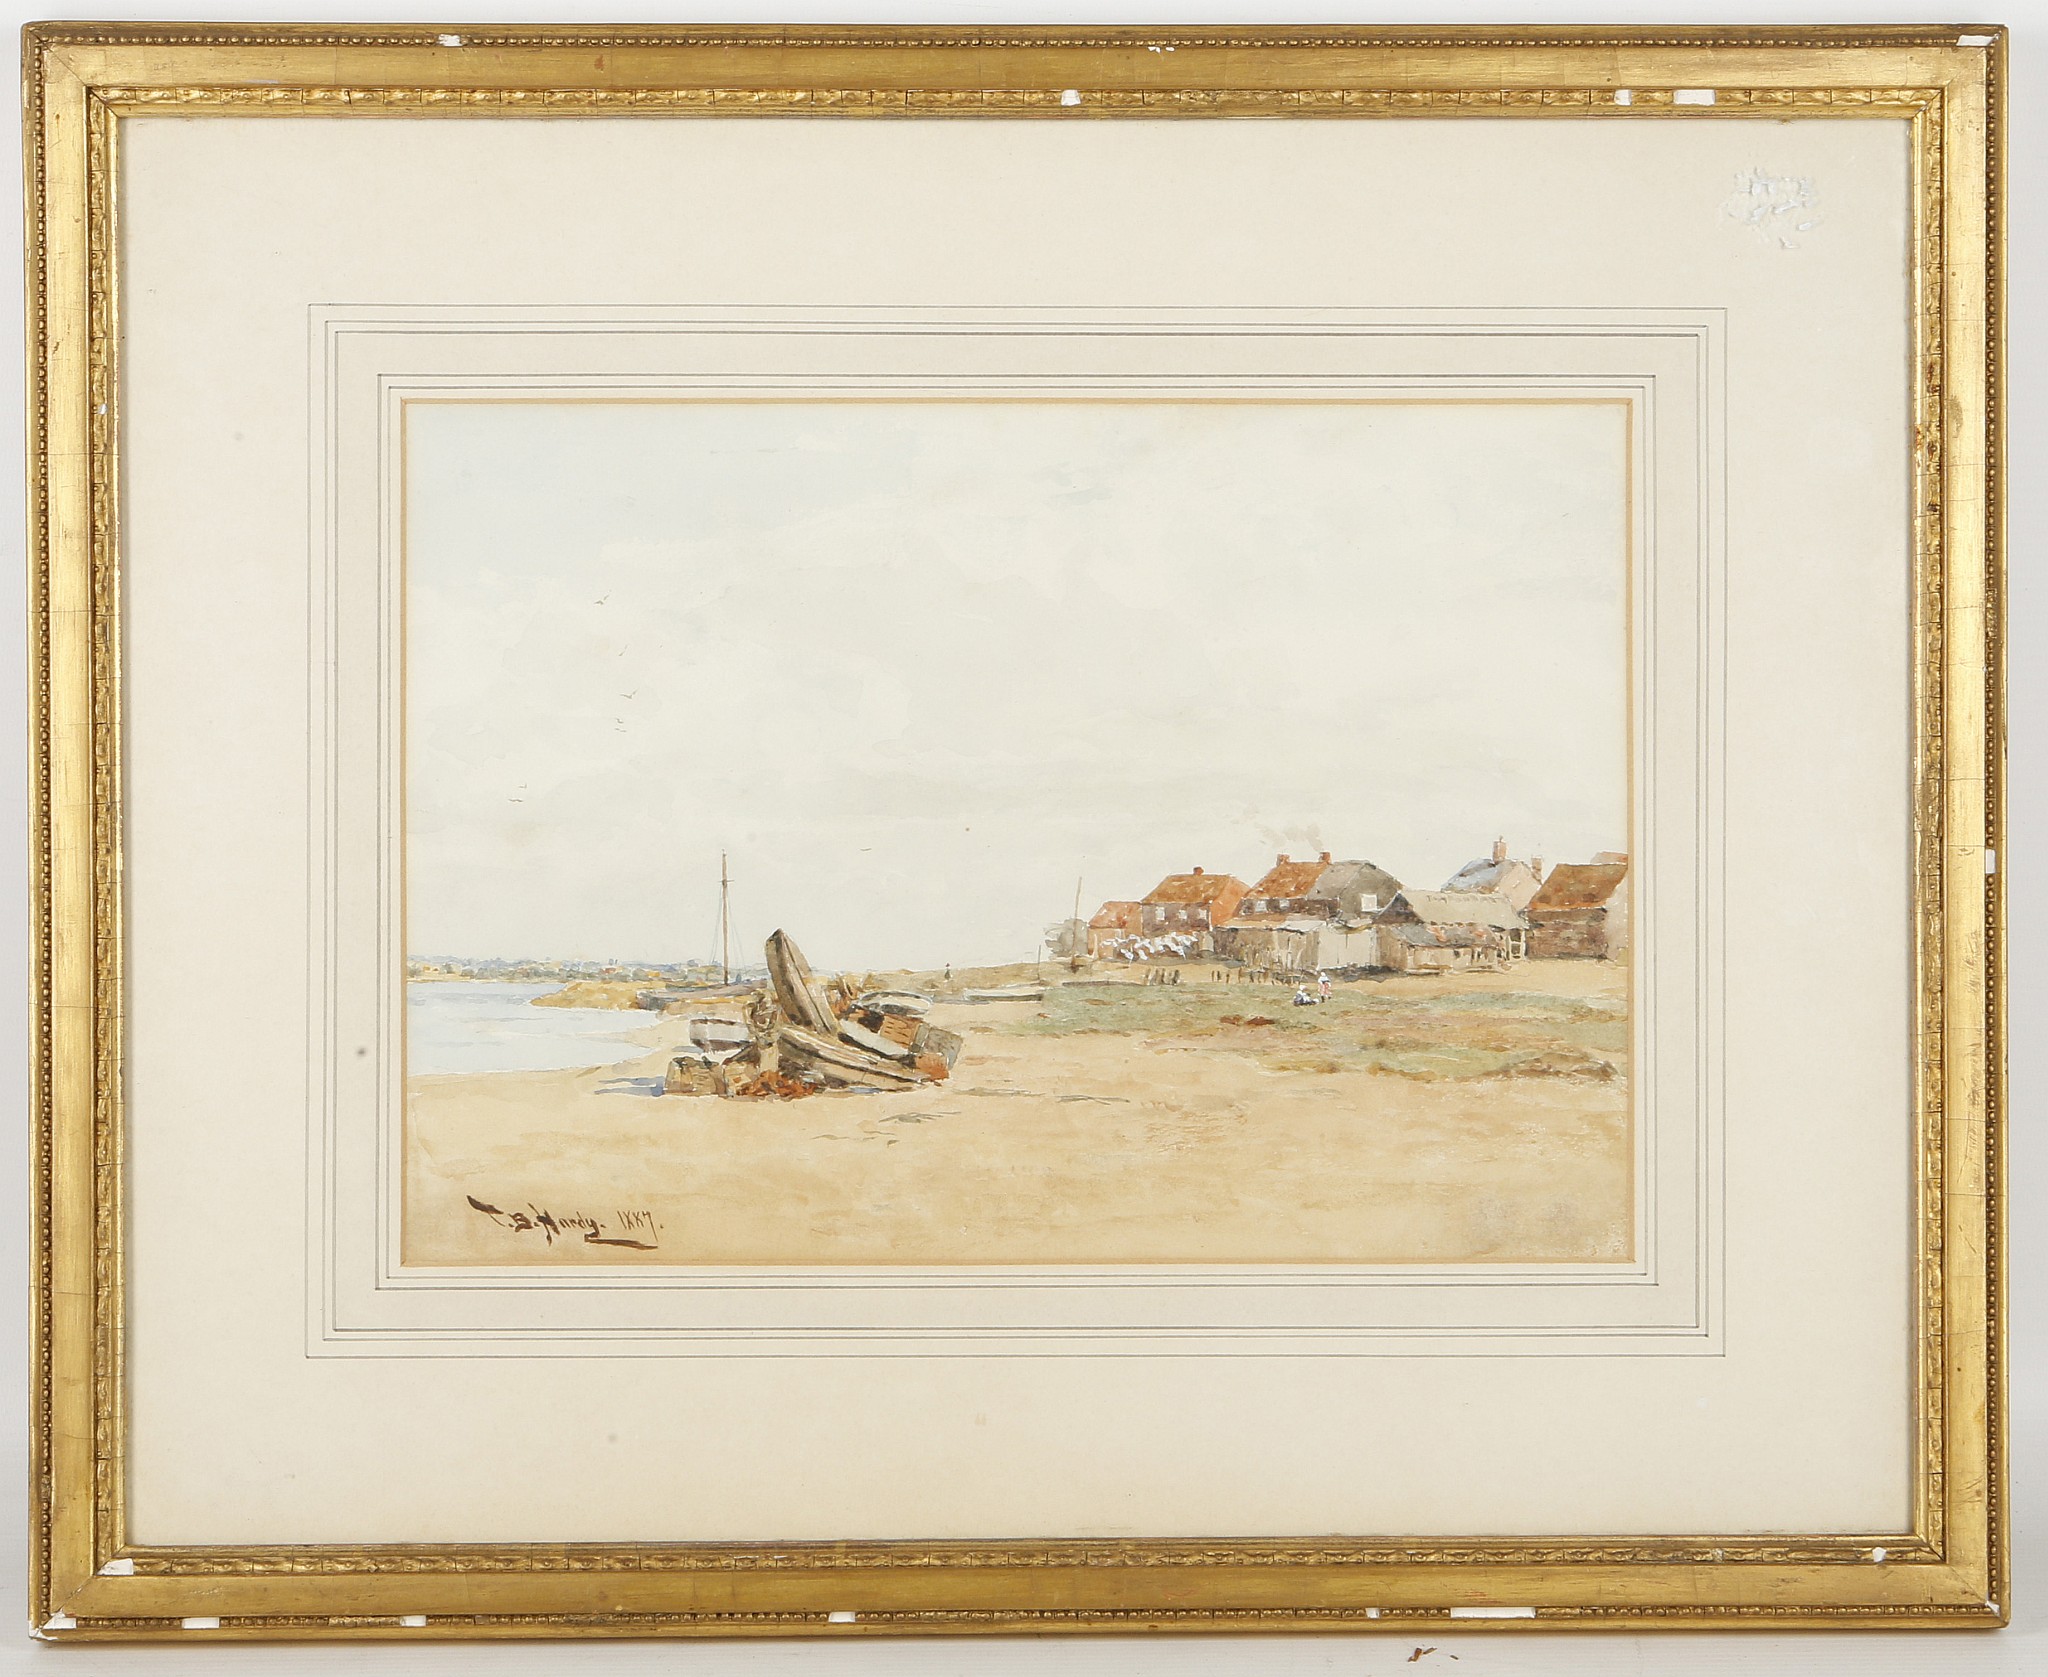 Thomas Bush Hardy 1887. Watercolour of a foreshore with boats. Picture size 23.5 x 33cm. Mounted,